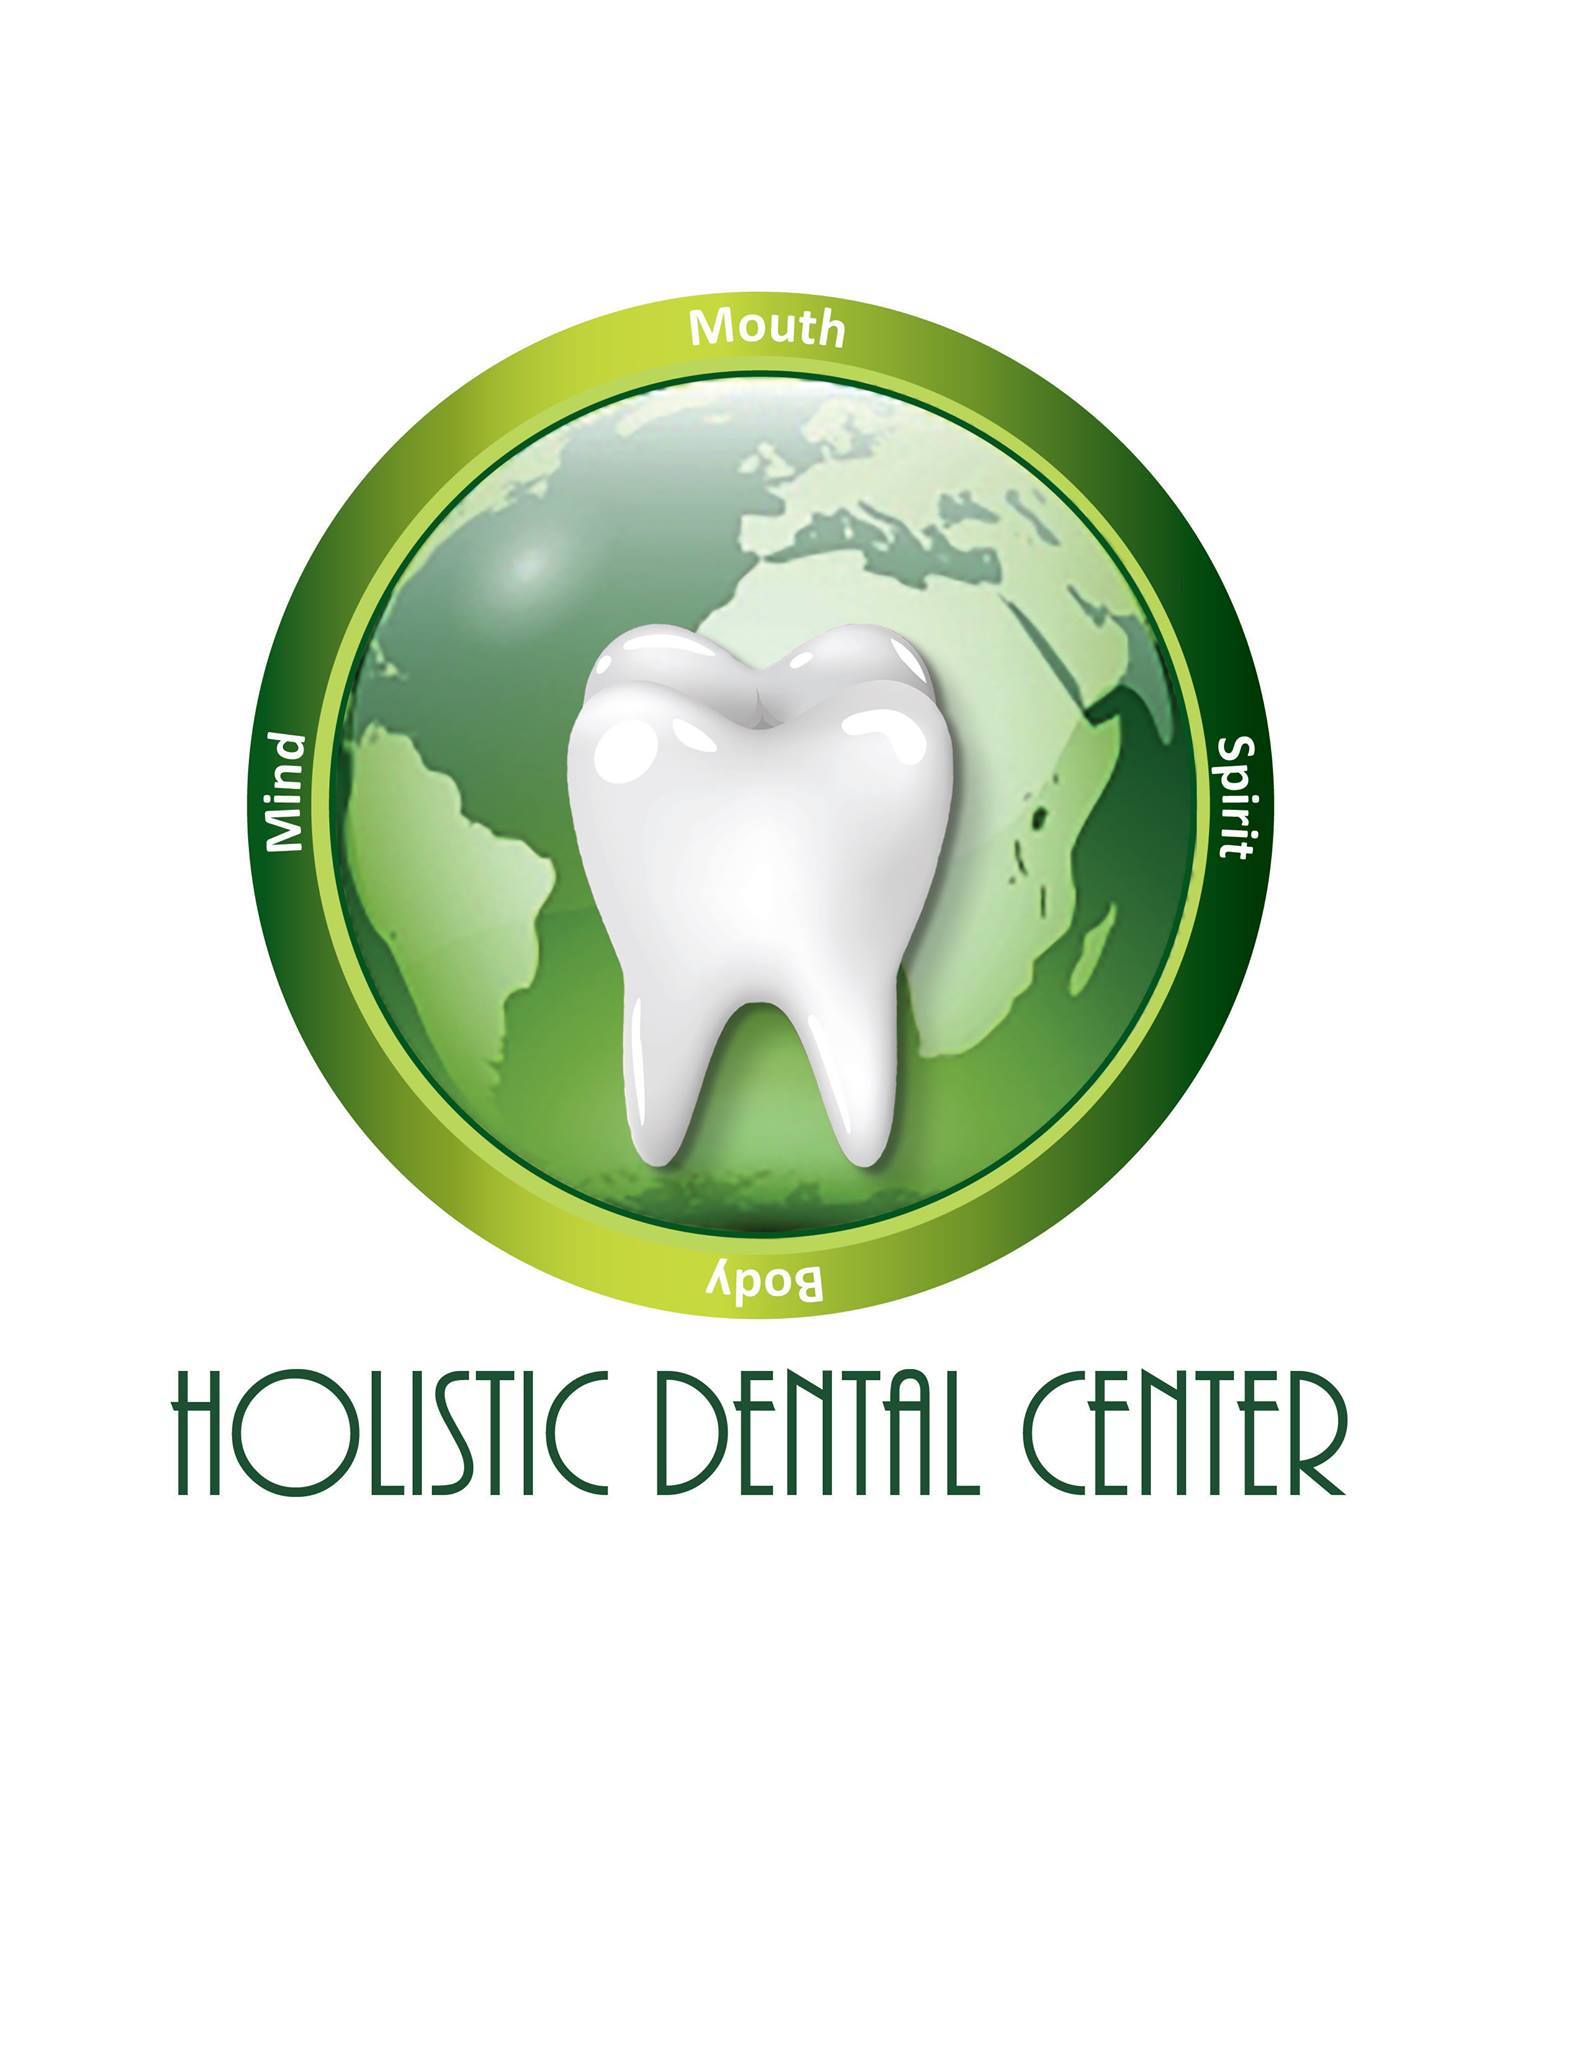 Holistic Dental Center Mentions Top Services They Offer